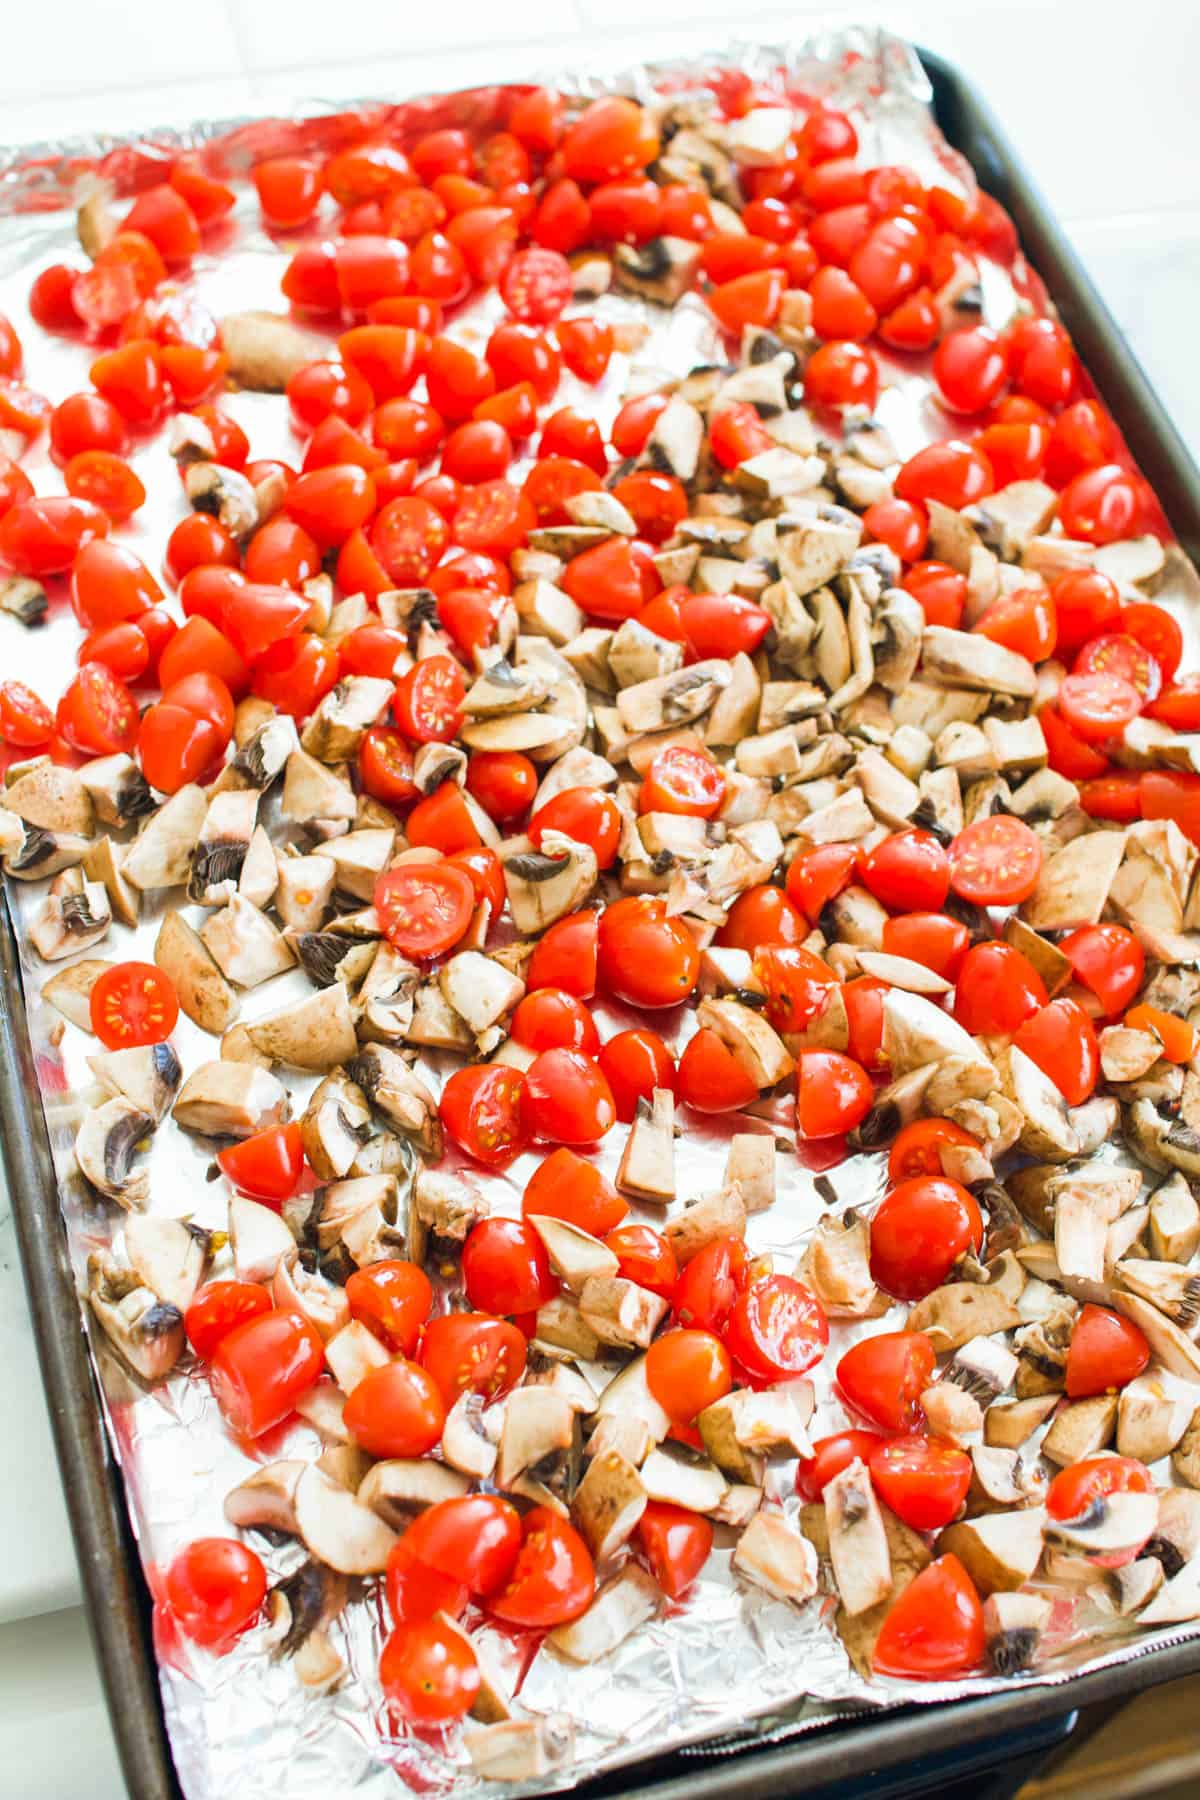 A sheet pan with cherry tomatoes and chopped mushrooms.